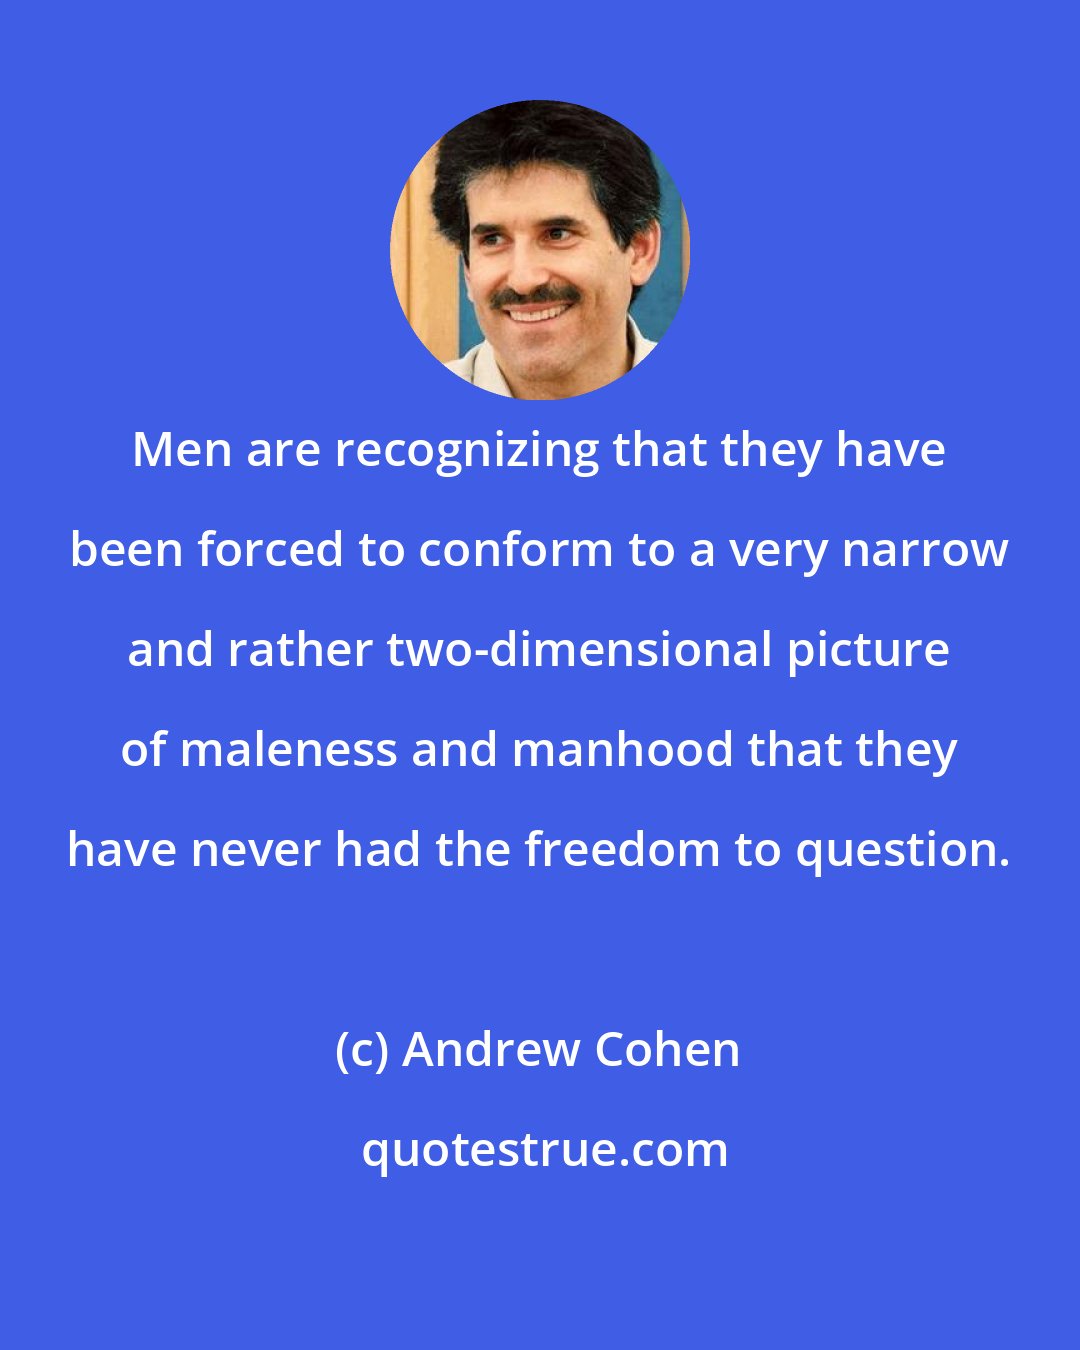 Andrew Cohen: Men are recognizing that they have been forced to conform to a very narrow and rather two-dimensional picture of maleness and manhood that they have never had the freedom to question.